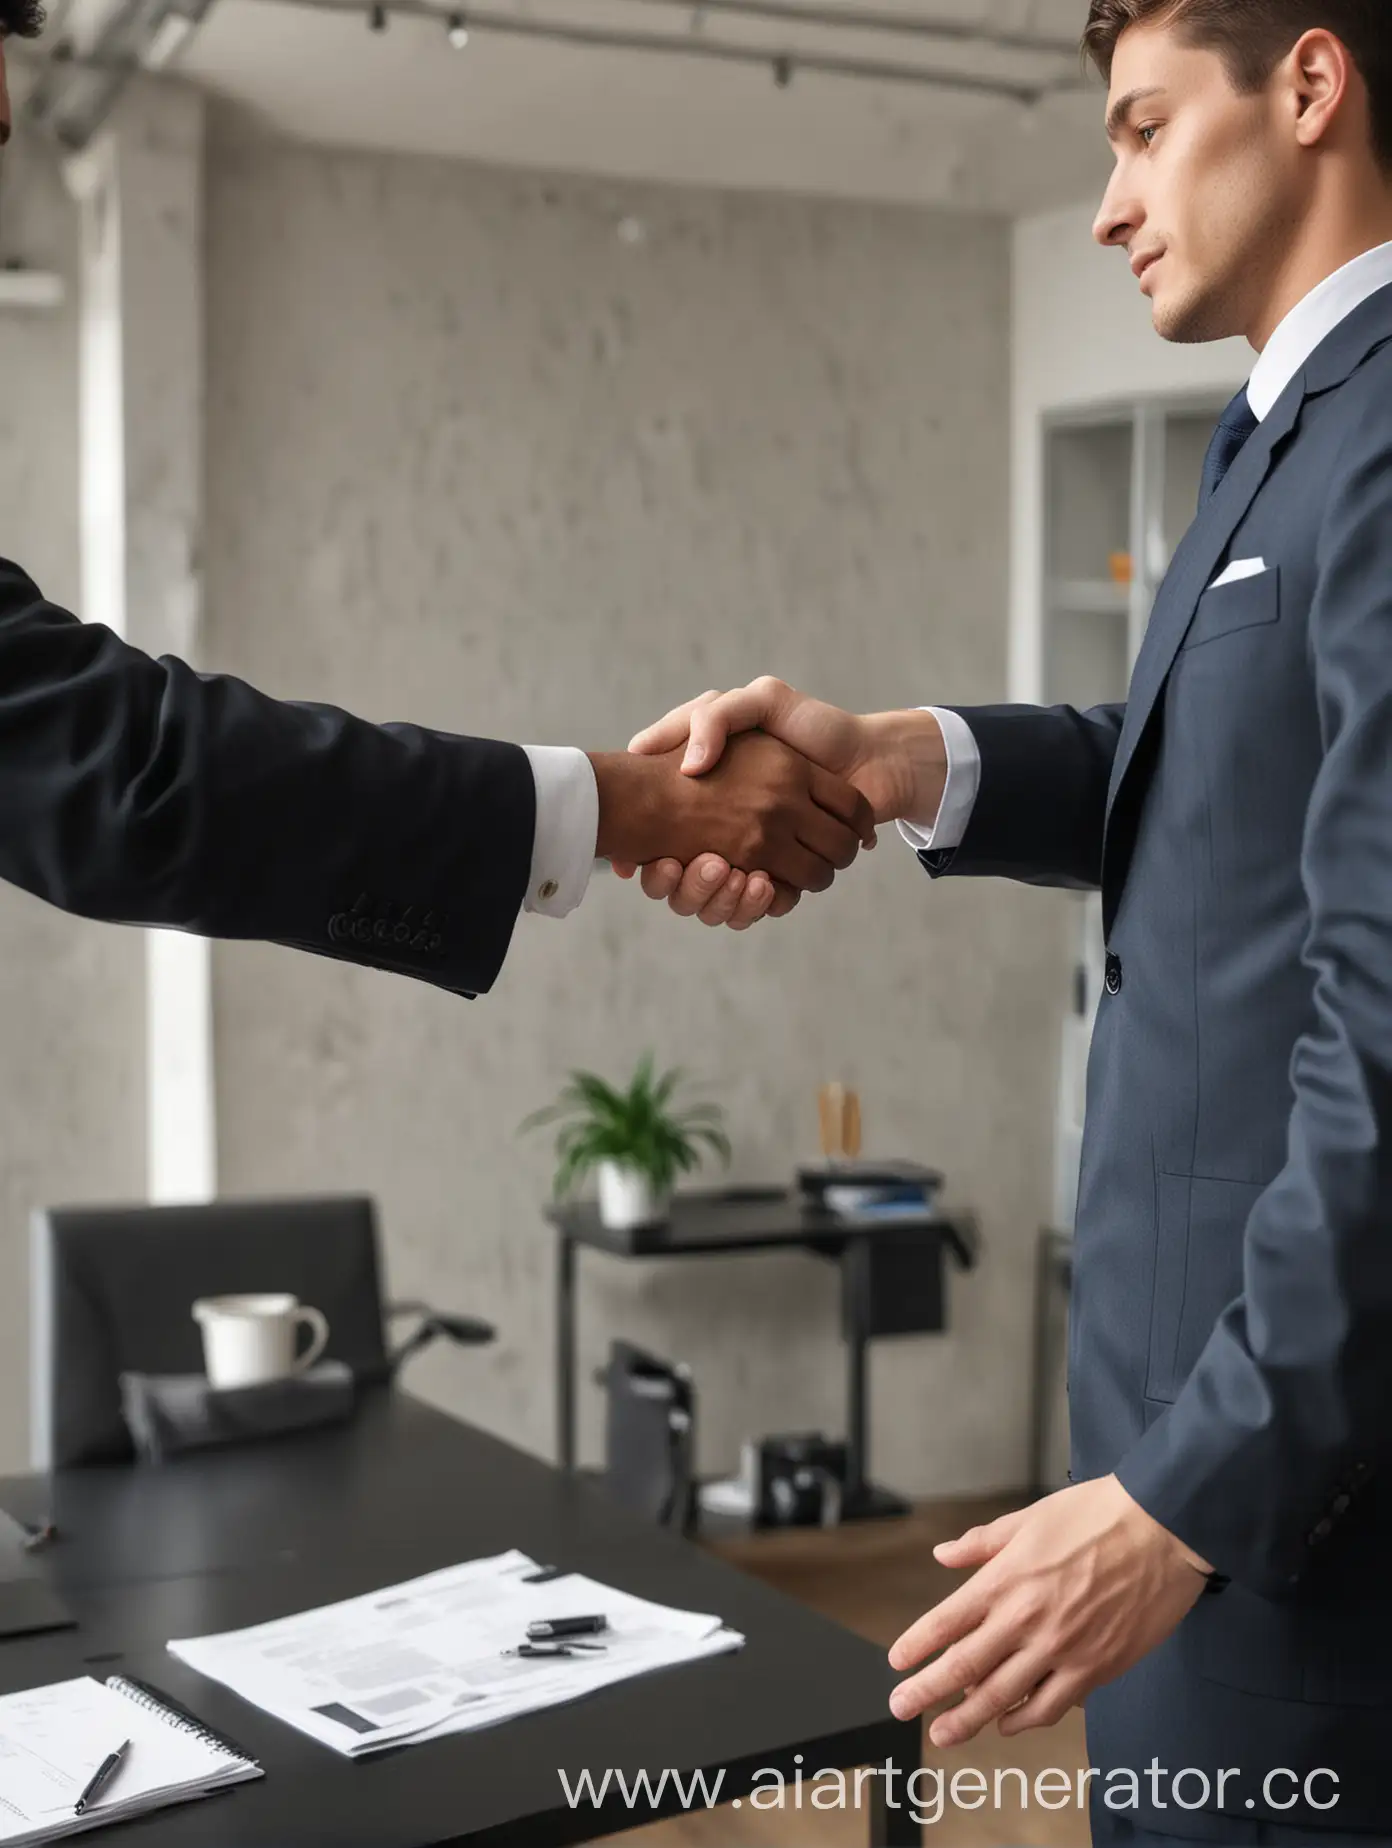 Businessmen-Shaking-Hands-in-Professional-Office-Setting